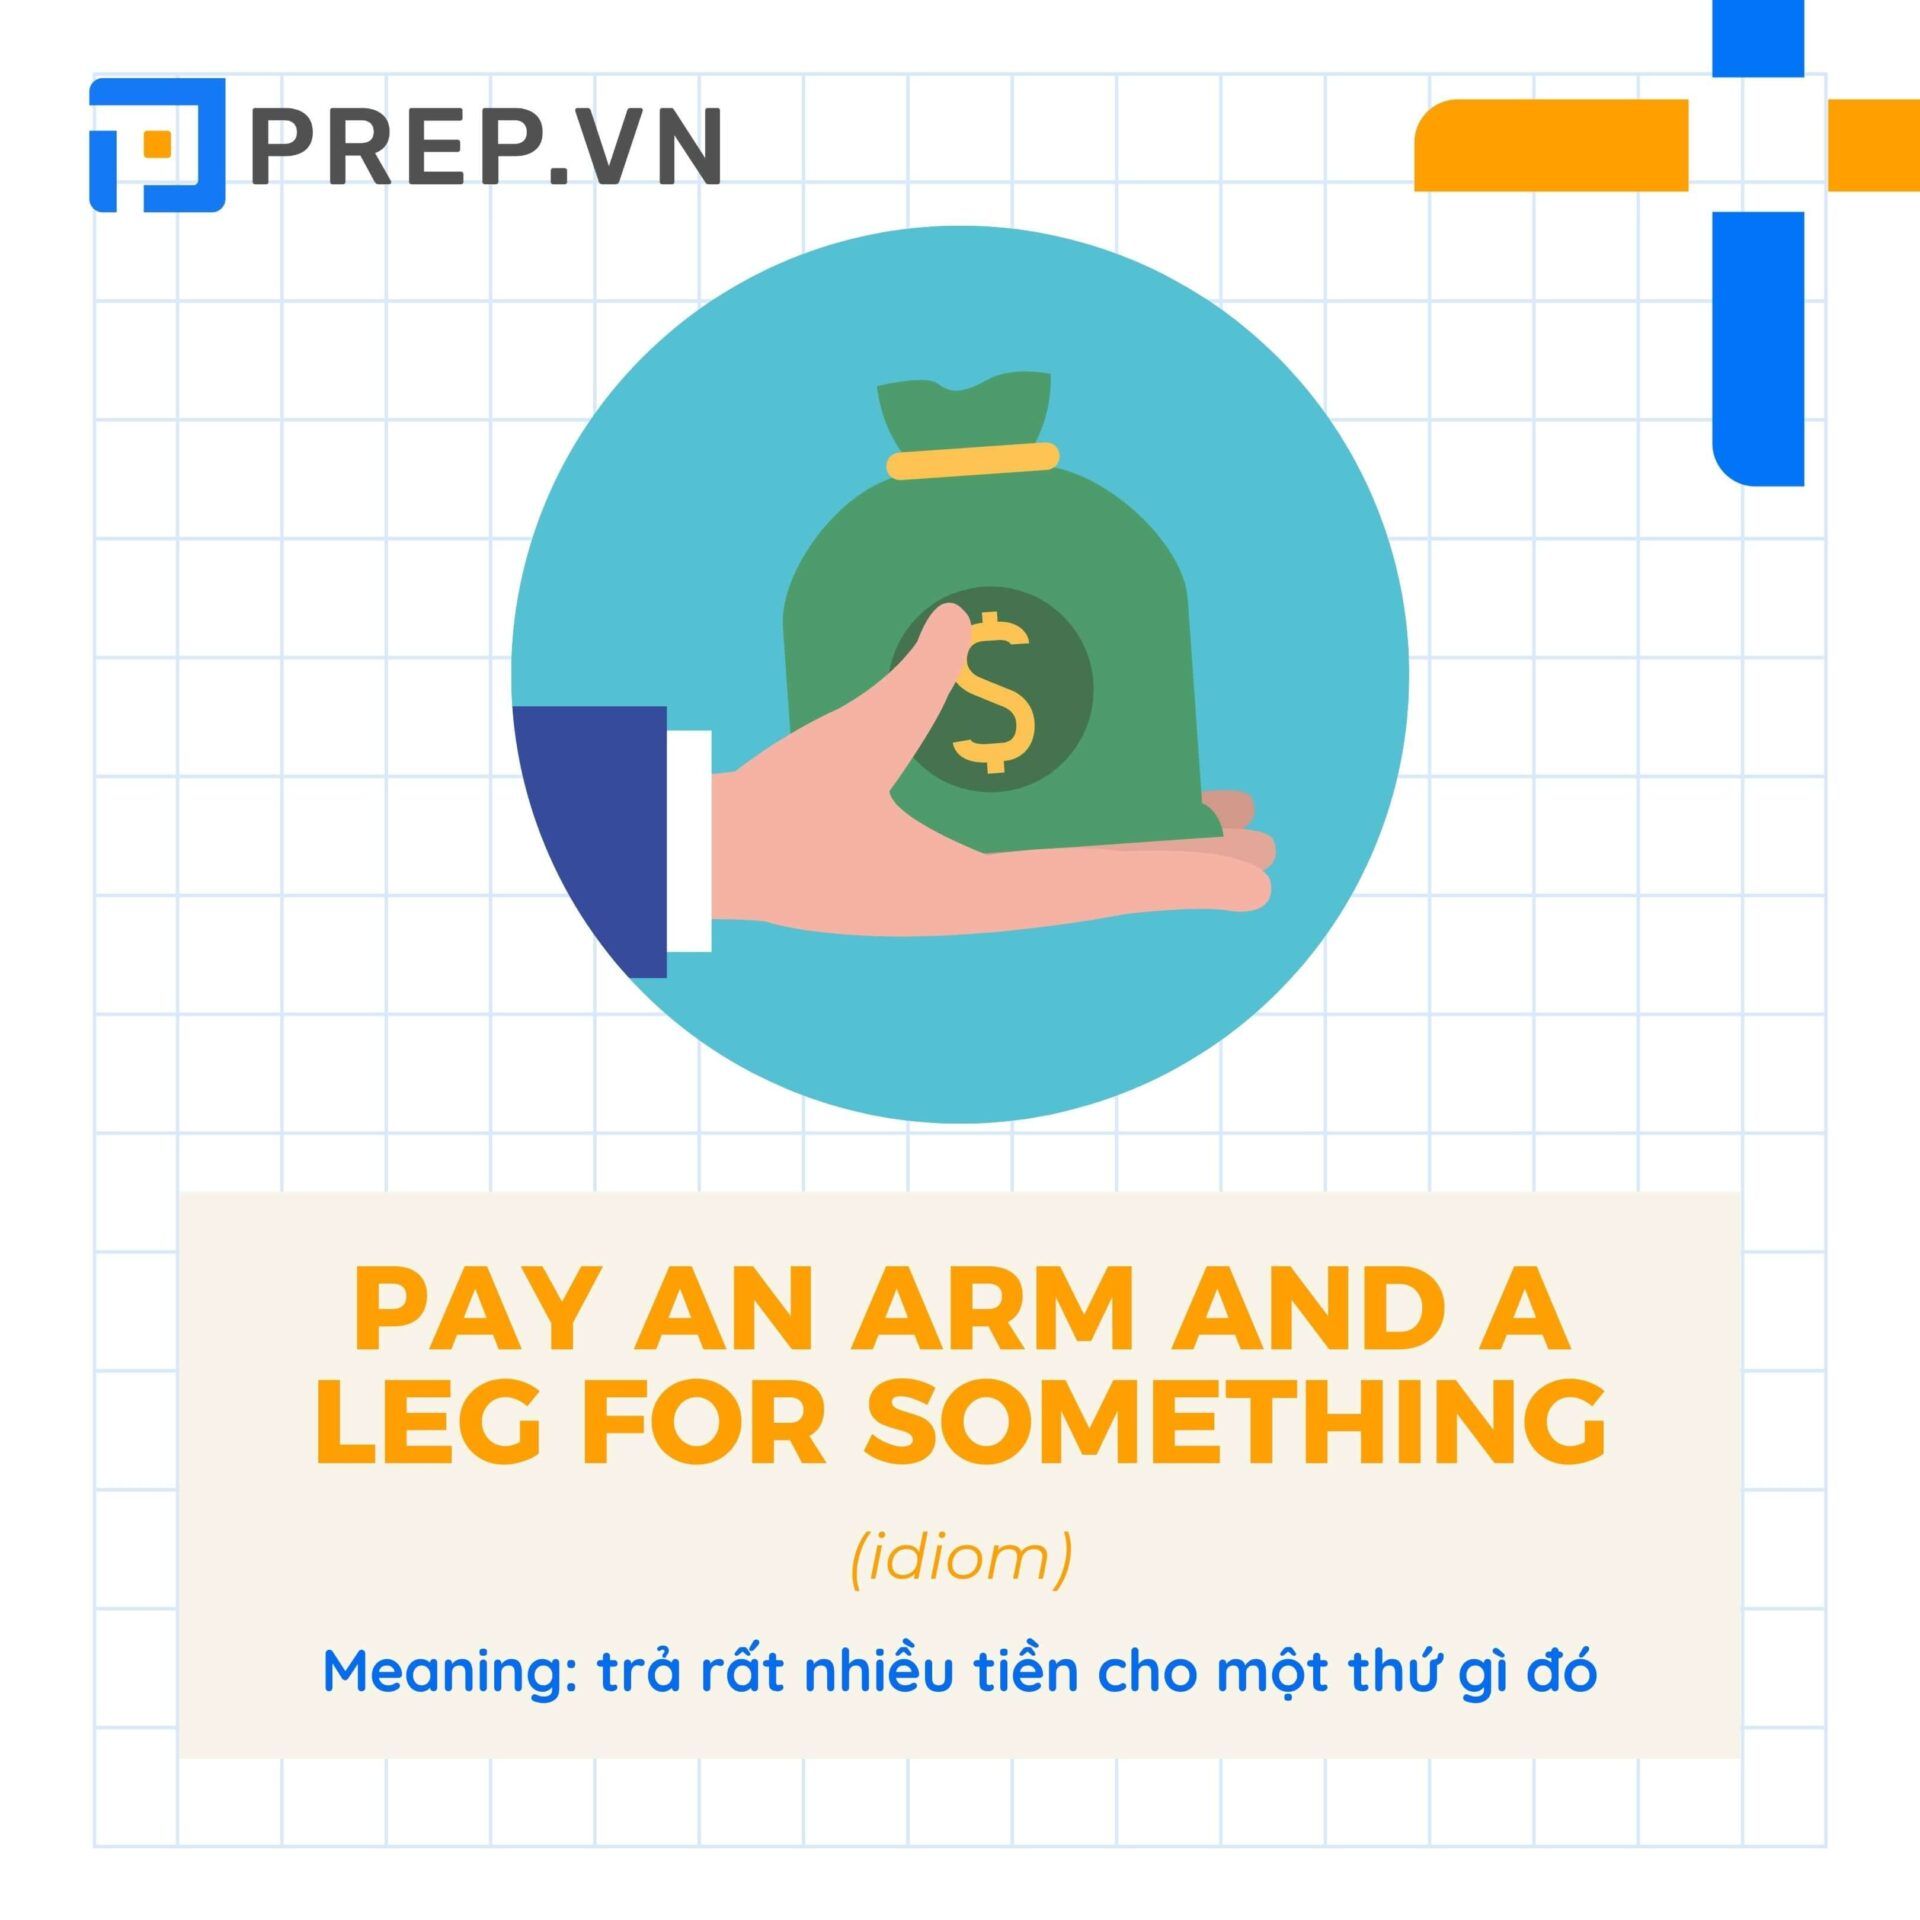 Pay an arm and a leg for something